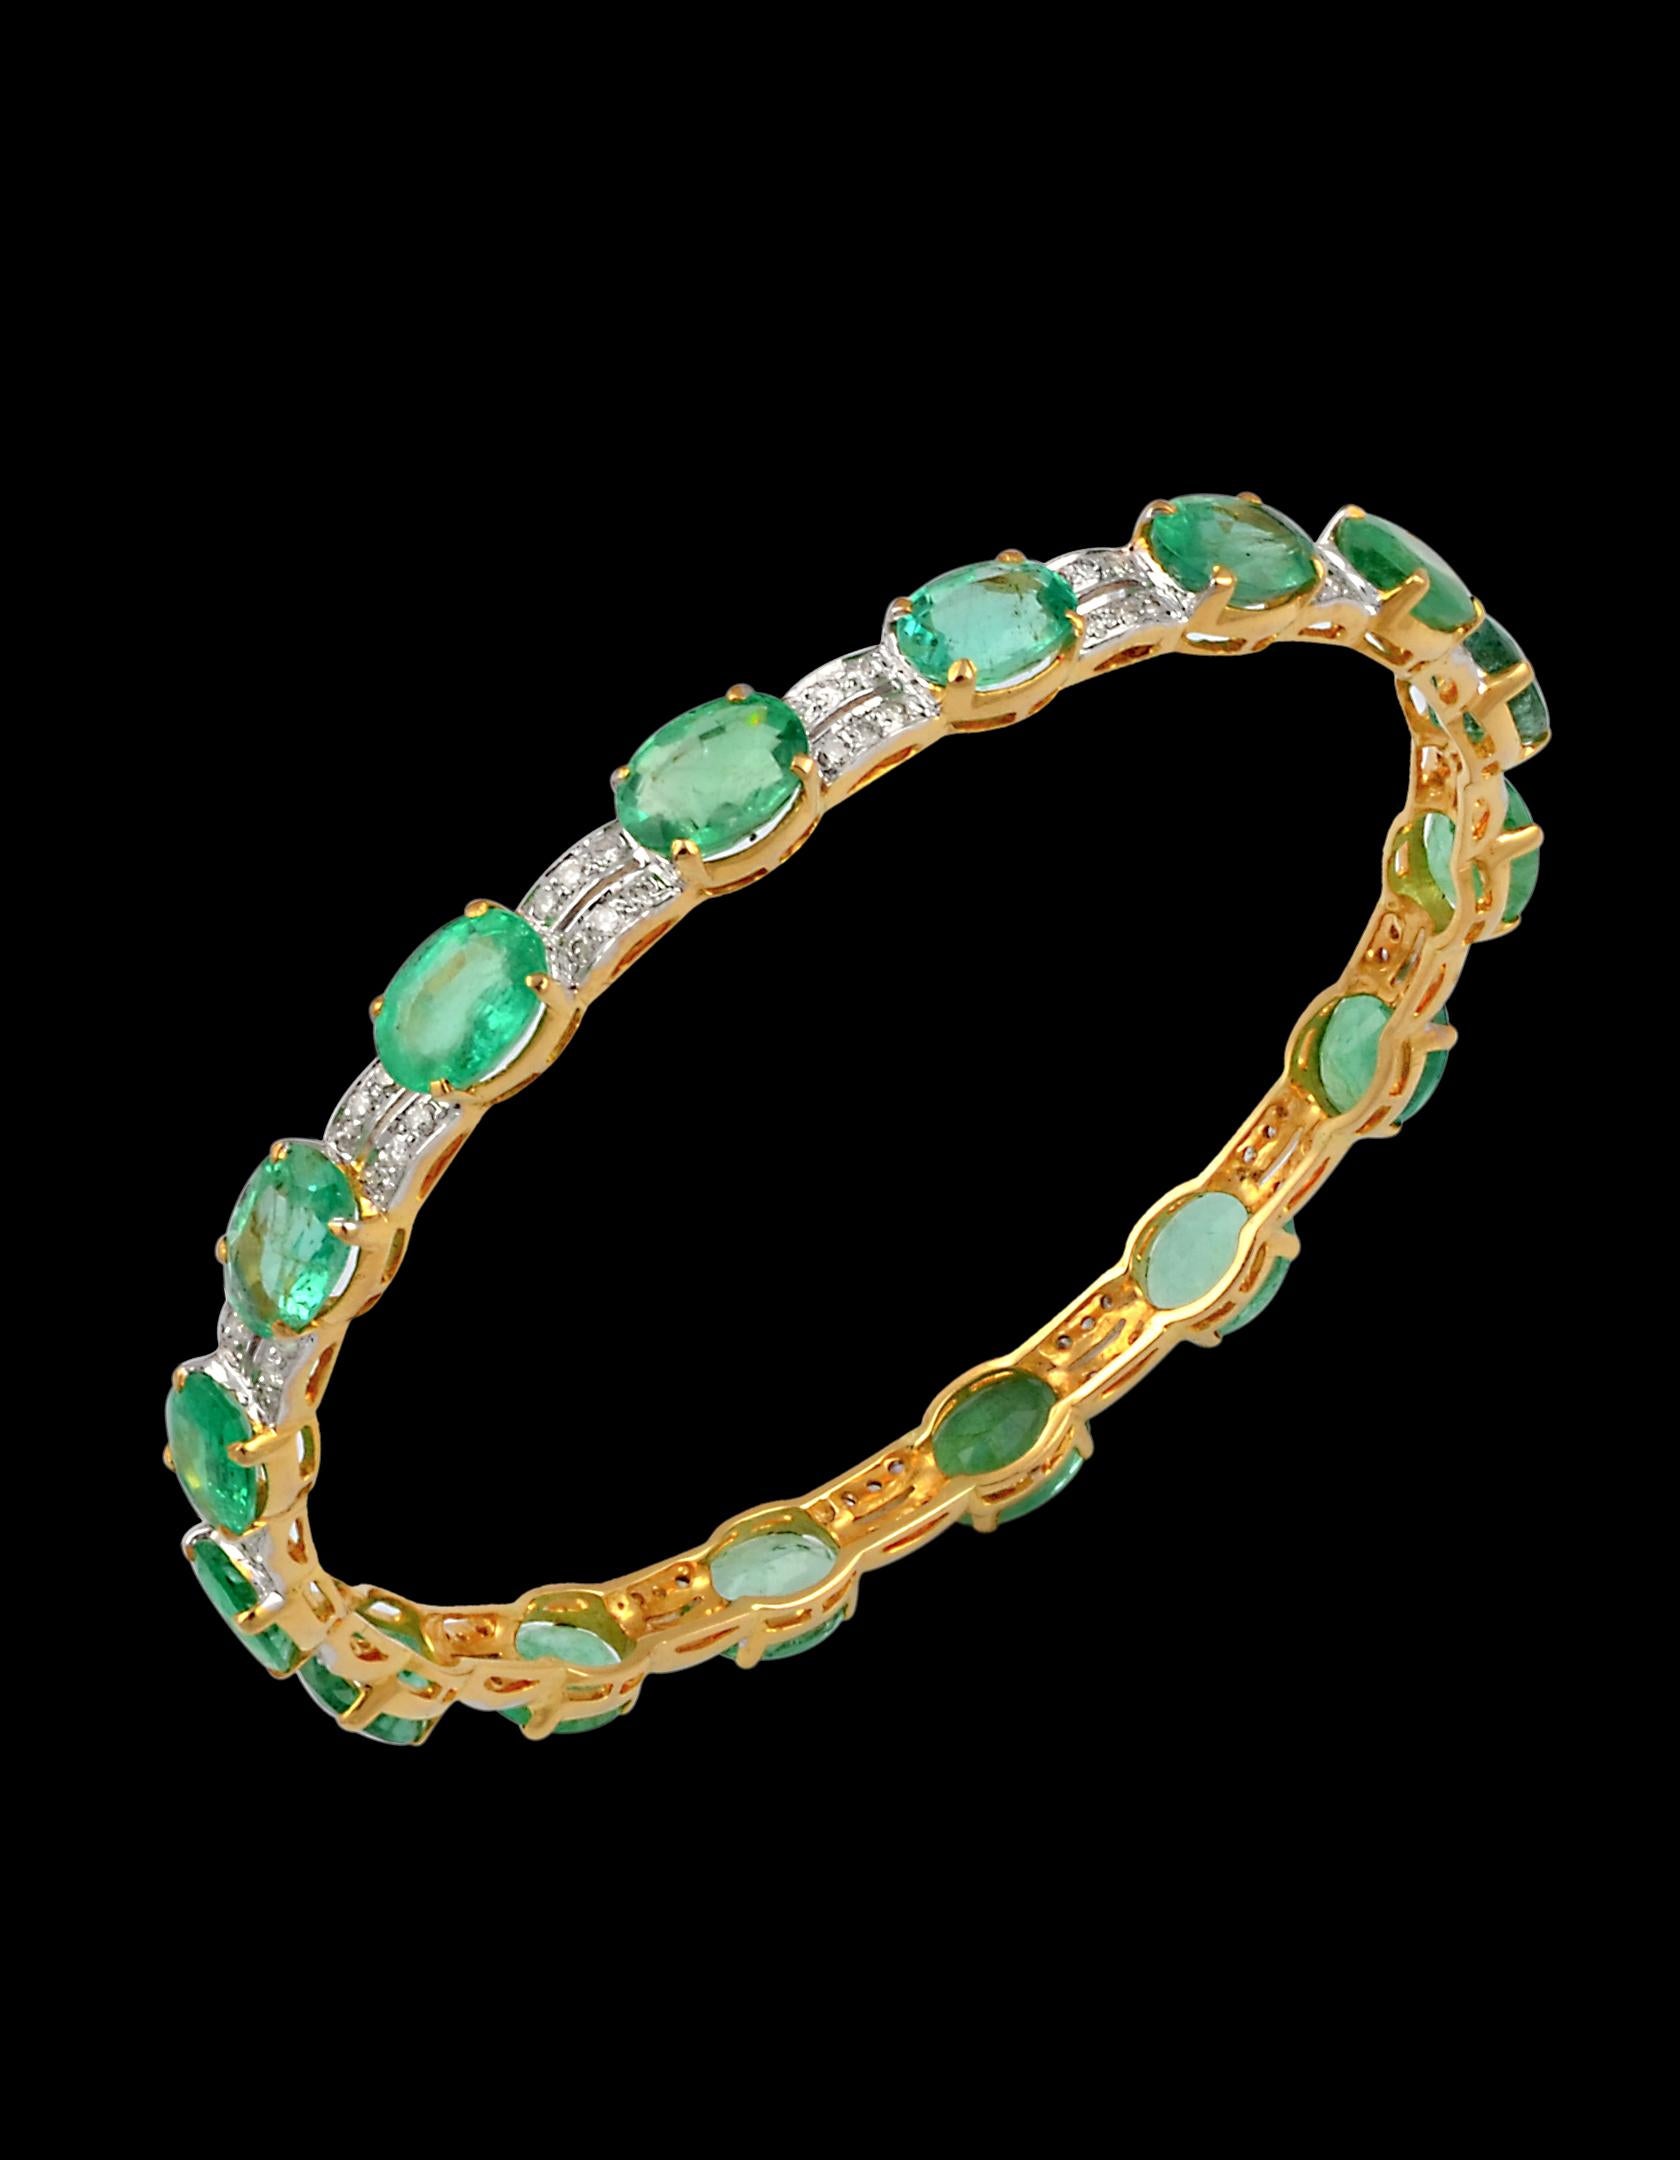  20 Carat Oval Natural Emeralds & Diamonds 18 Karat Yellow Gold 17 Grams Bangle 
It features a bangle crafted with  18 karat Yellow gold and  Round brilliant  cut diamonds 
Emeralds  16 pieces , each  6 X 8 MM approximately 1.25 ct each , total